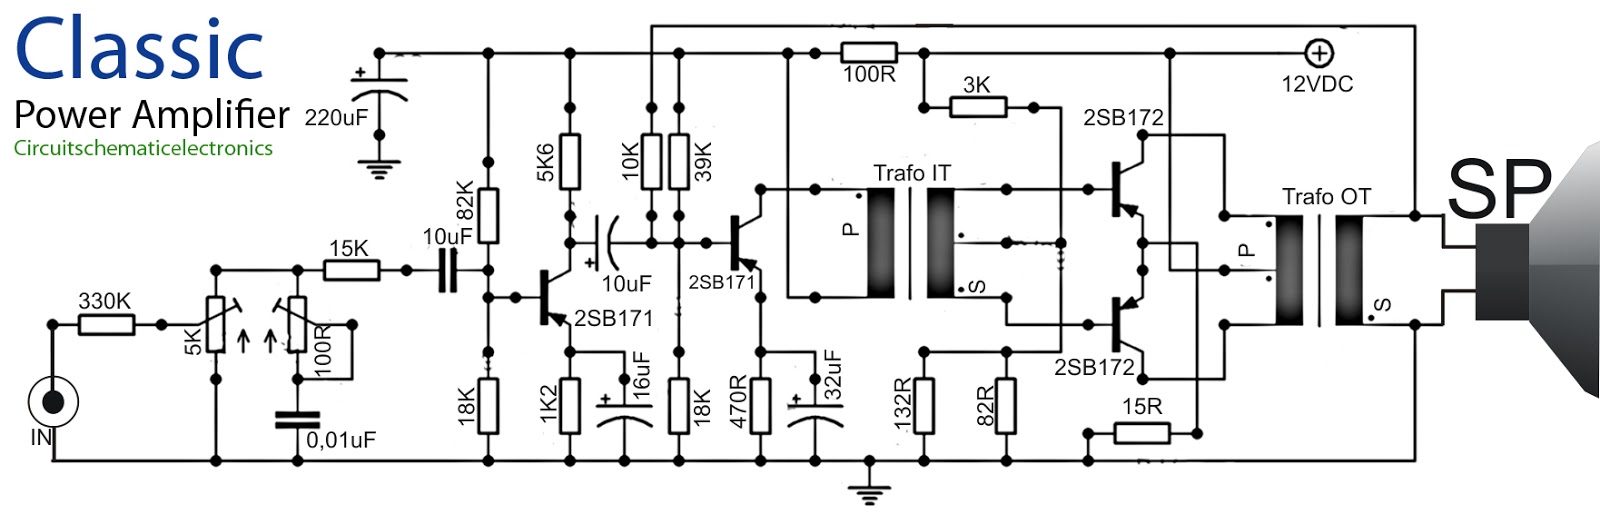 Classical Audio Power Amplifier With It And Ot Transformer Electronic Circuit